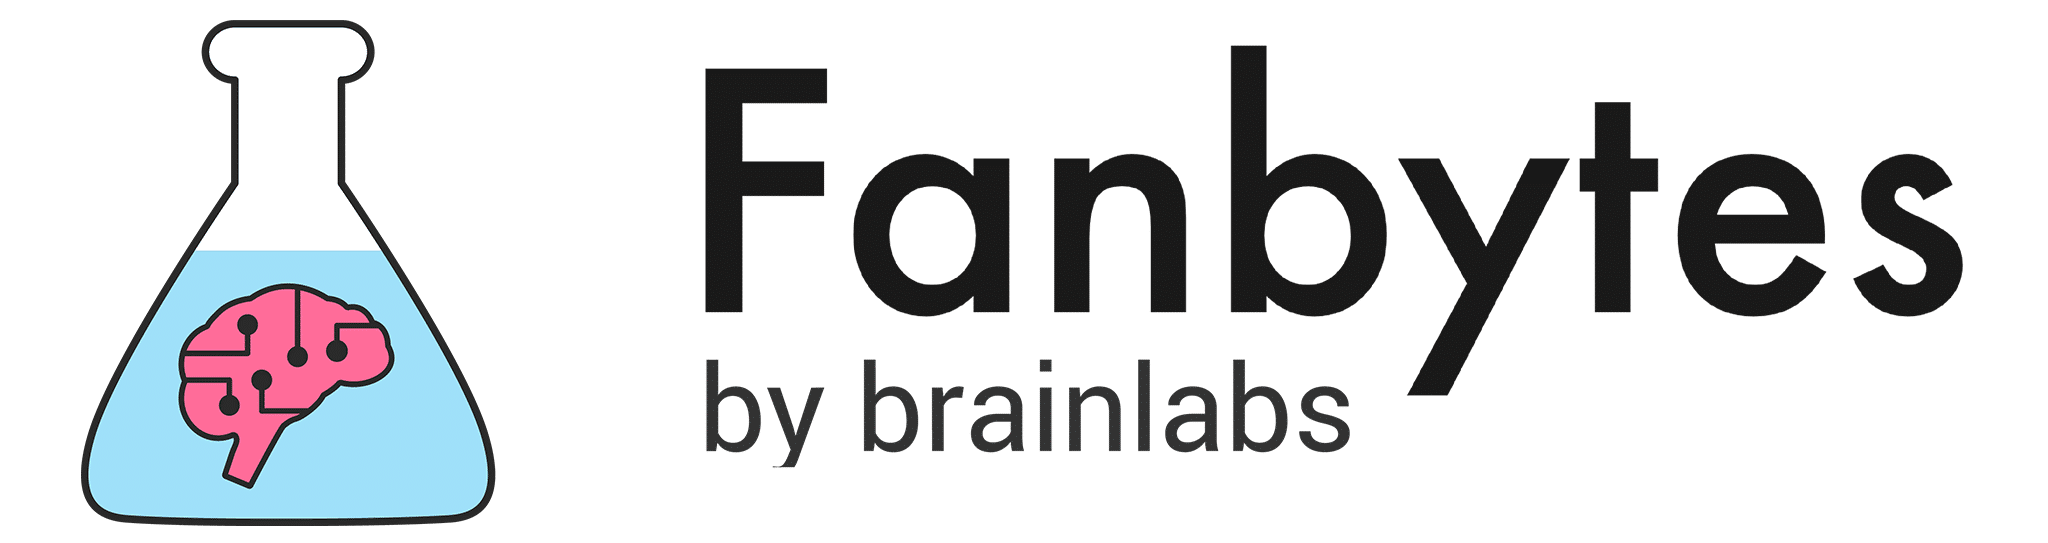 fanbytes by brainlabs